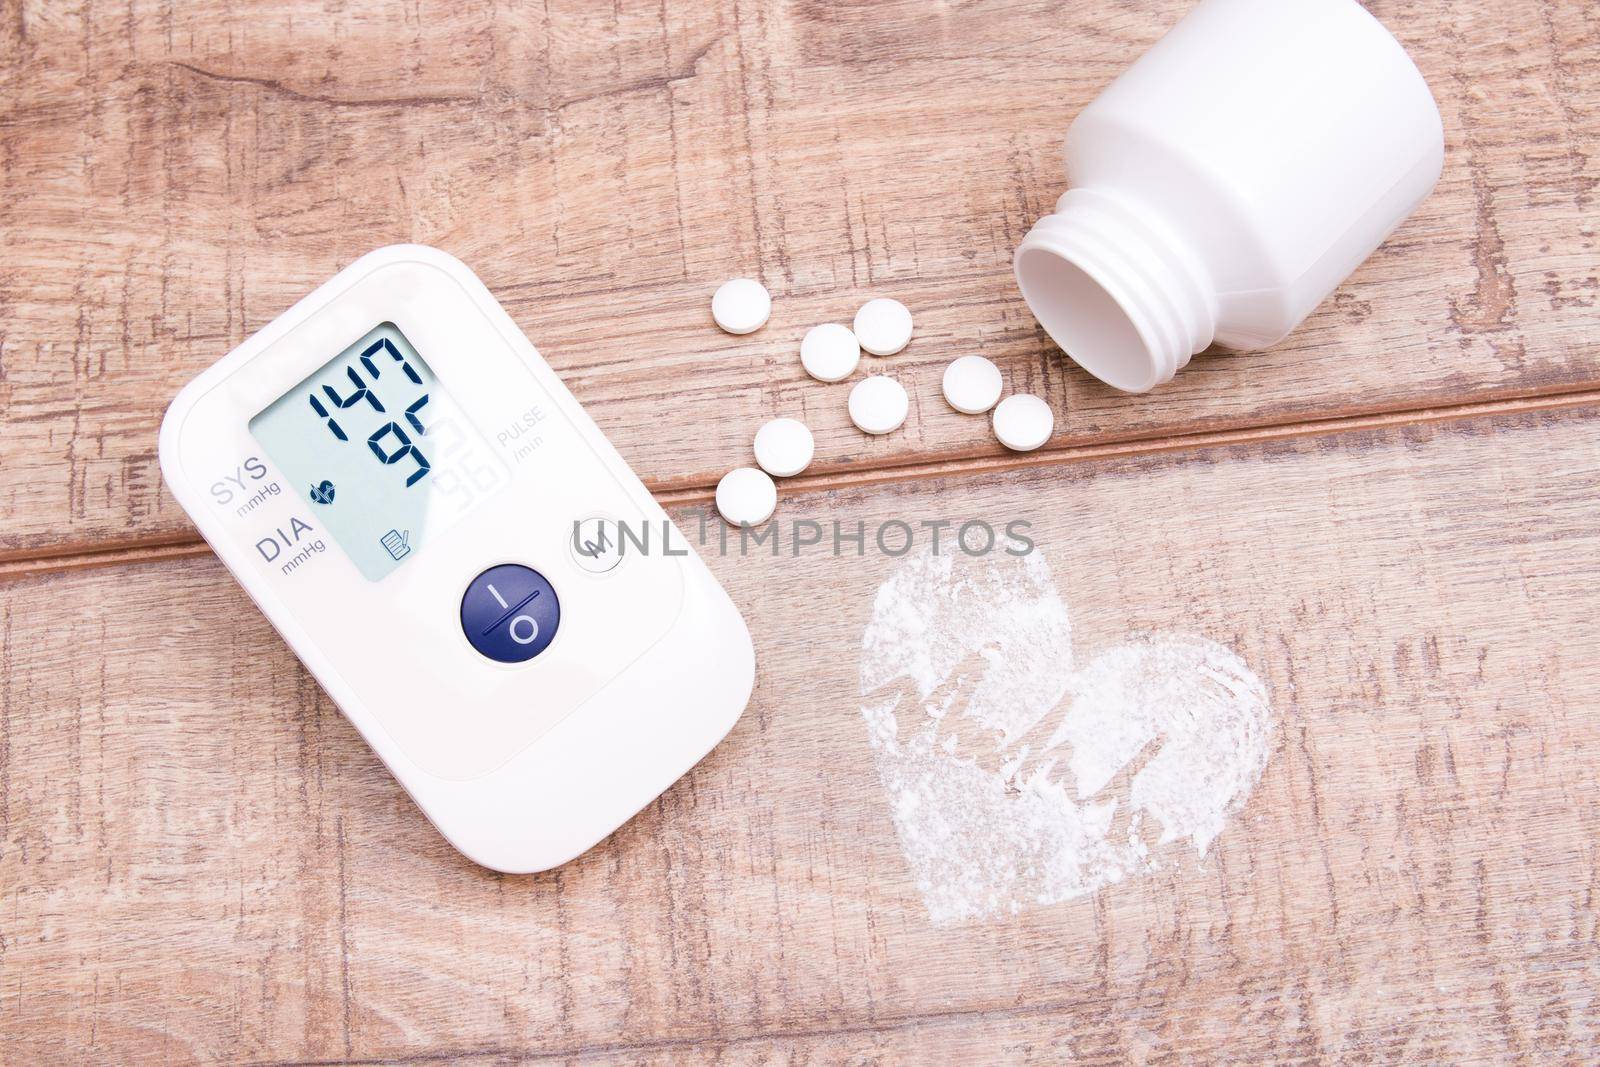 blood pressure monitor and white jar with tablets on a wooden background, heart made of white powder, pulse drawn, copy space, top view, heart pressure concept